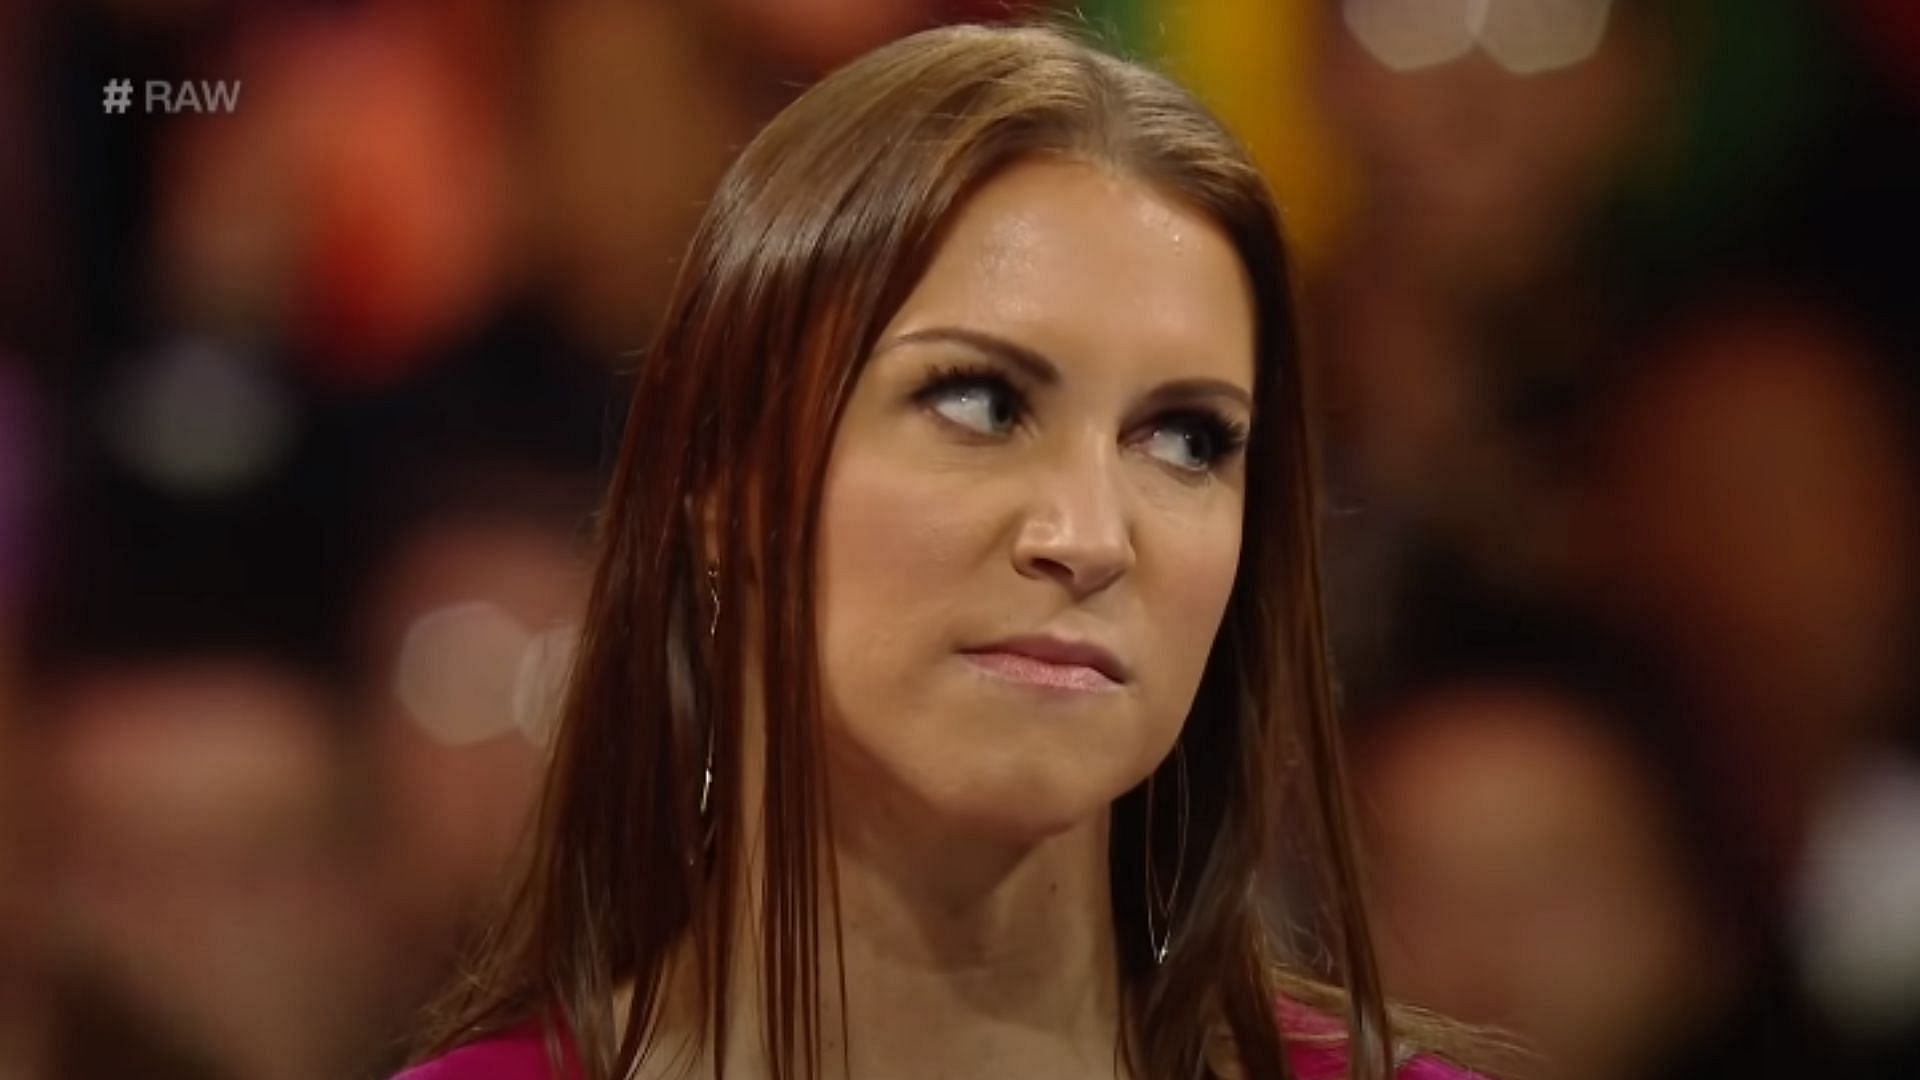 Stephanie McMahon is married to fellow WWE executive Triple H.